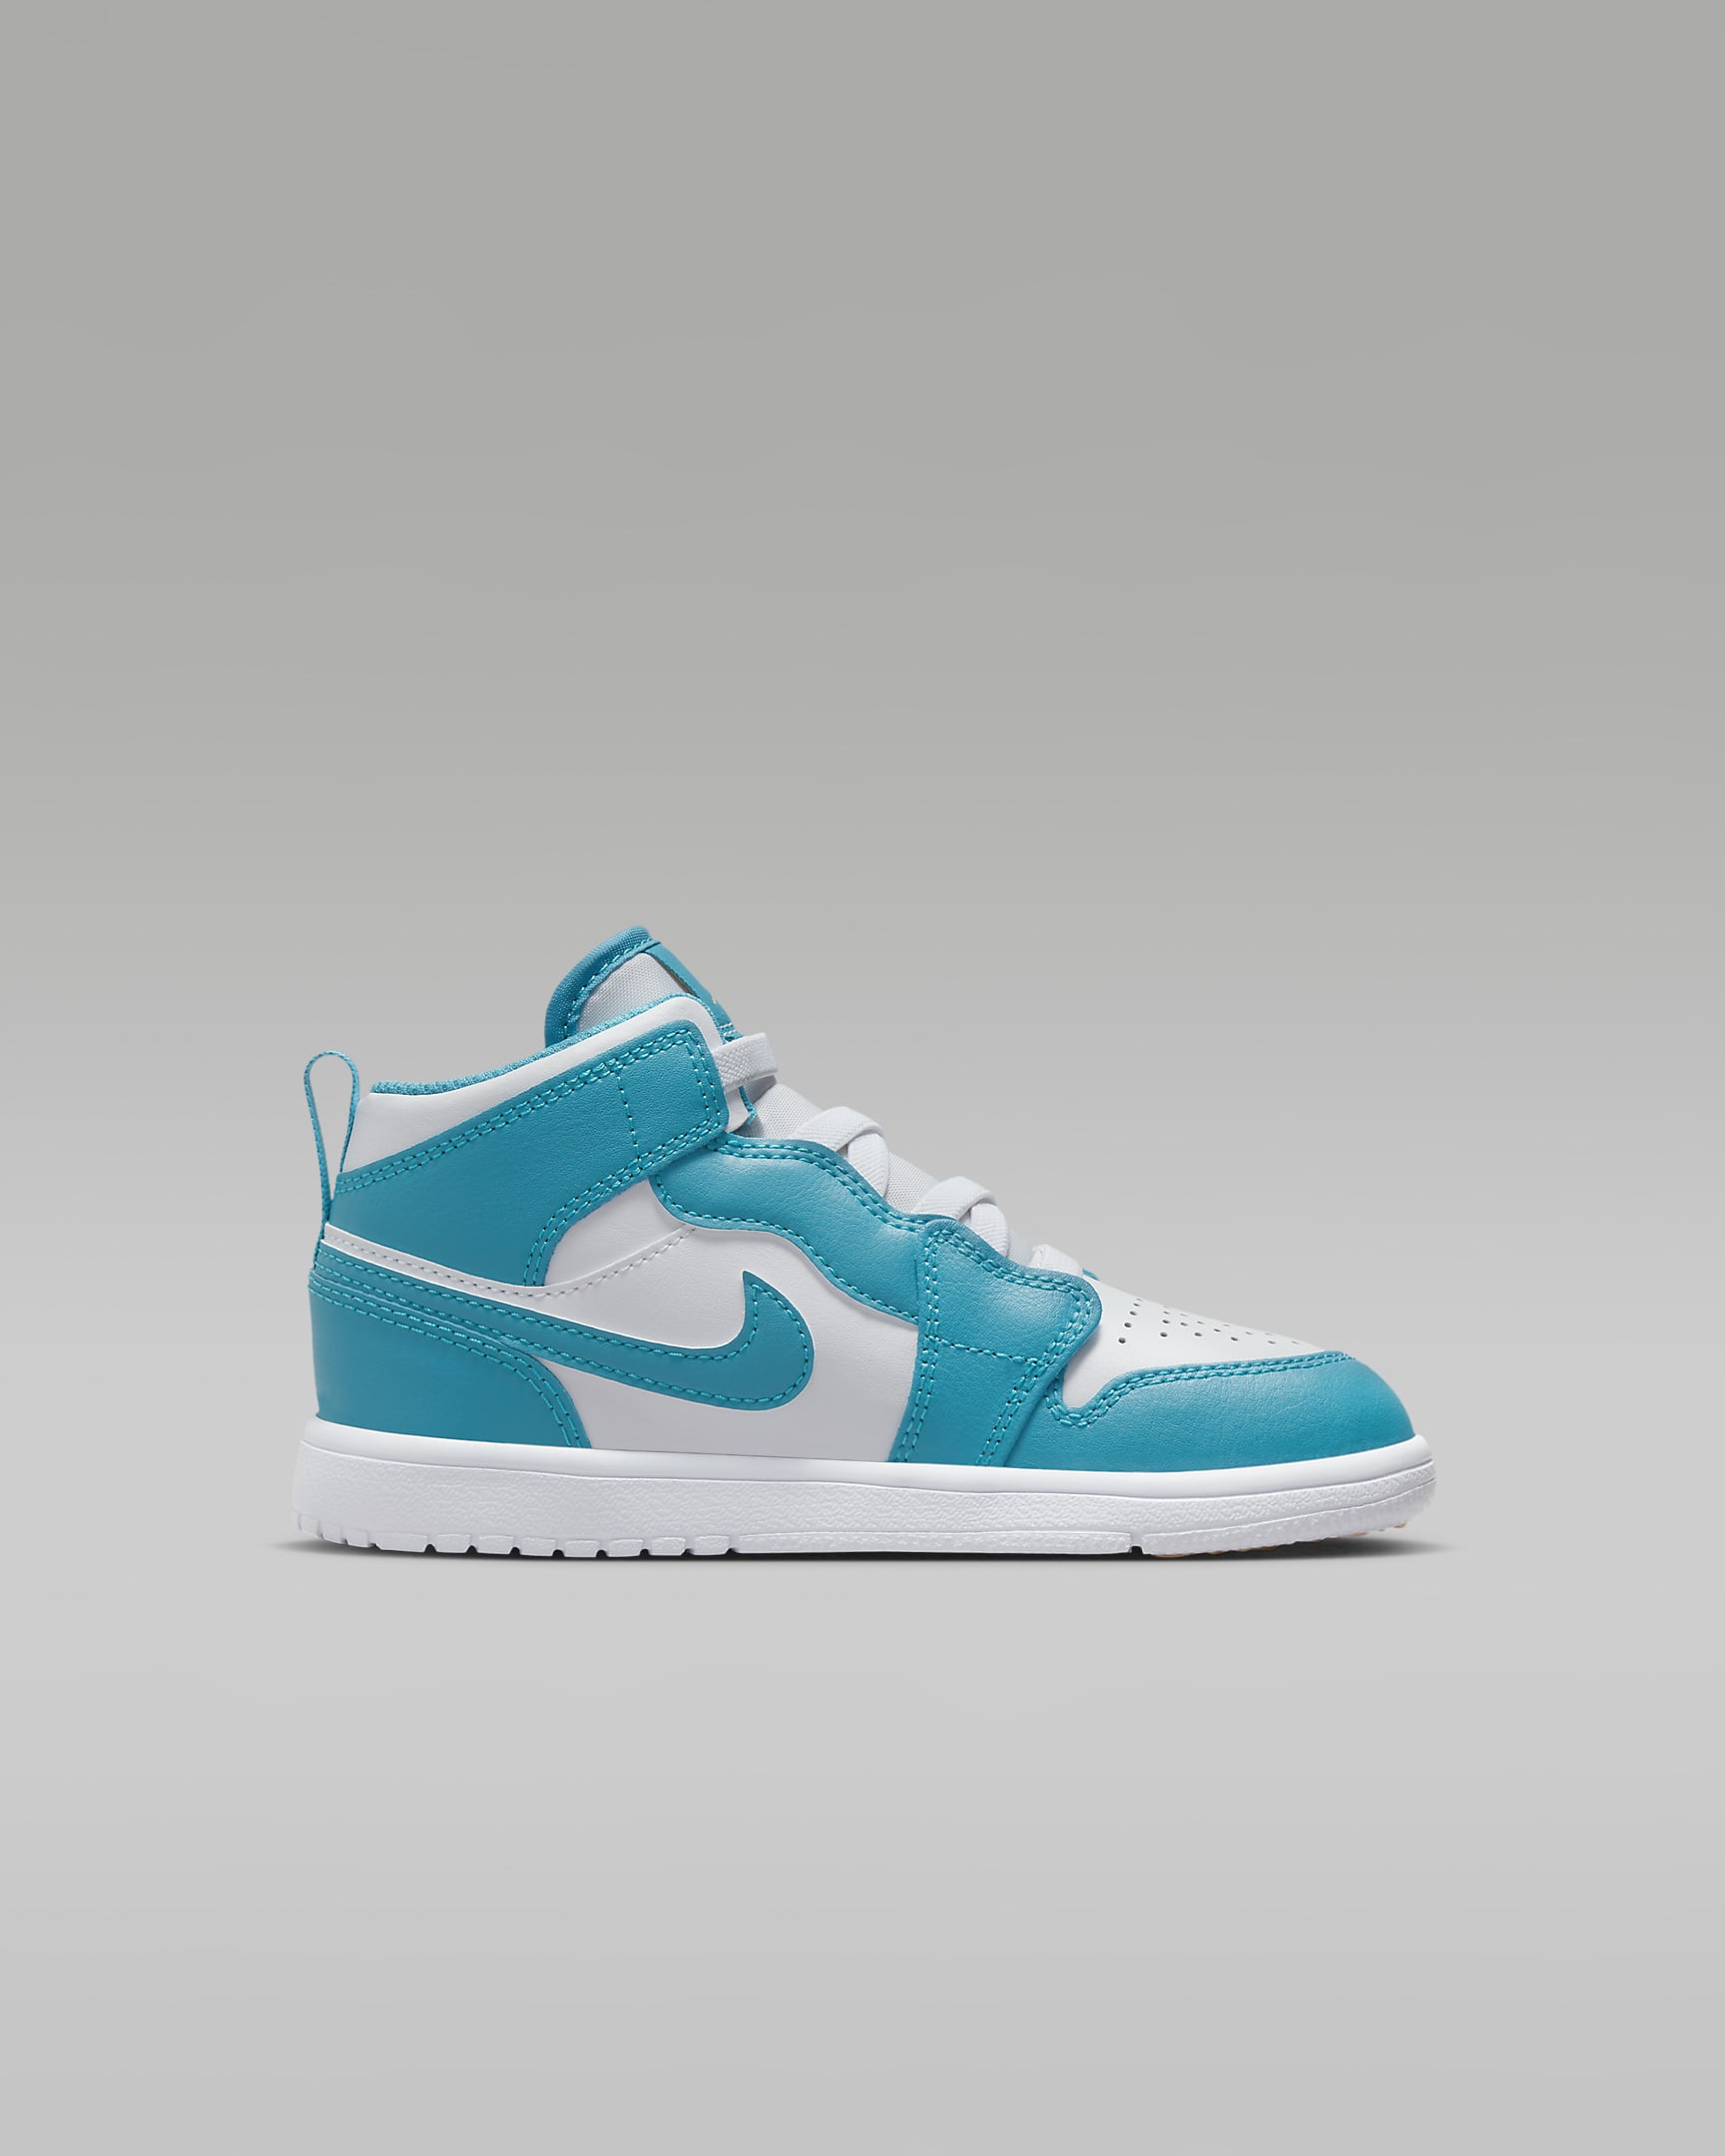 Jordan 1 Mid Younger Kids' Shoes. Nike IN